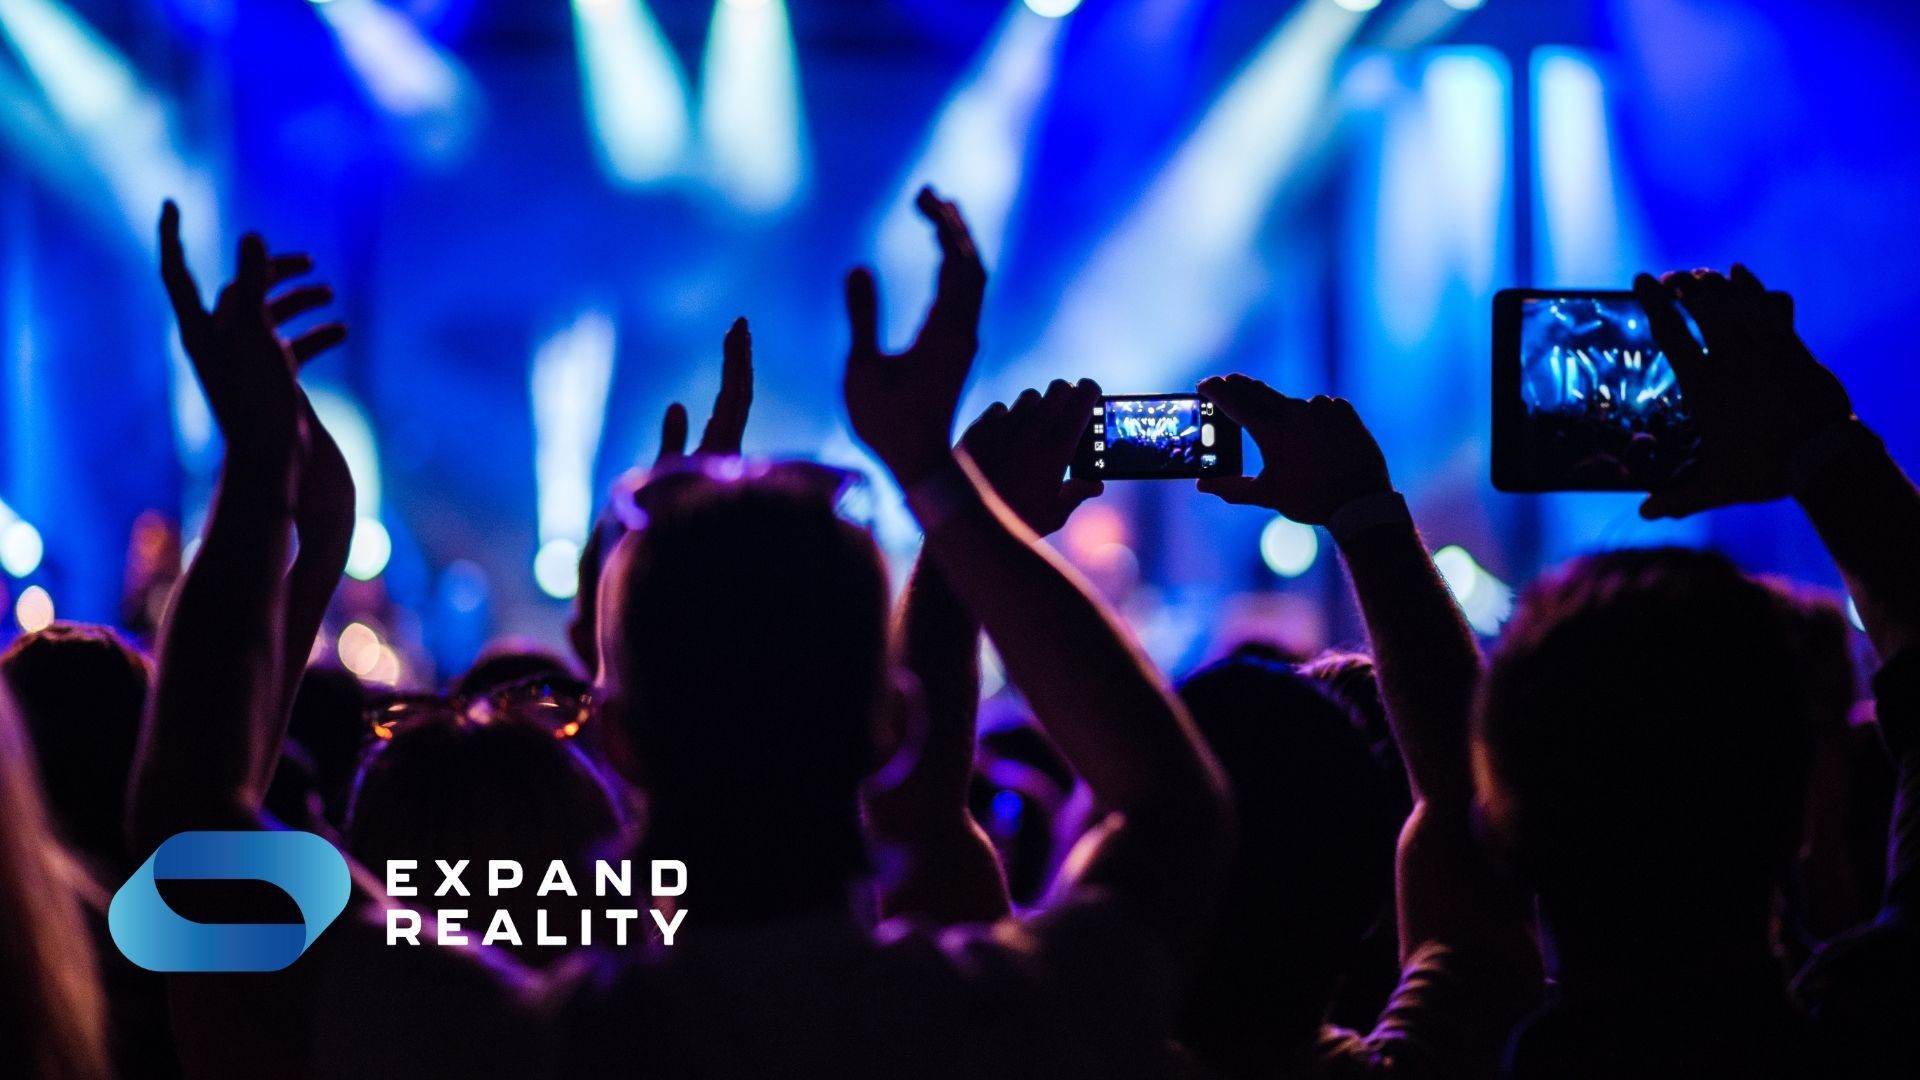 Ever wanted to see a digital avatar of your favourite band? With virtual concerts, you can. Are they here to stay or just a flash in the pan? Find out more.